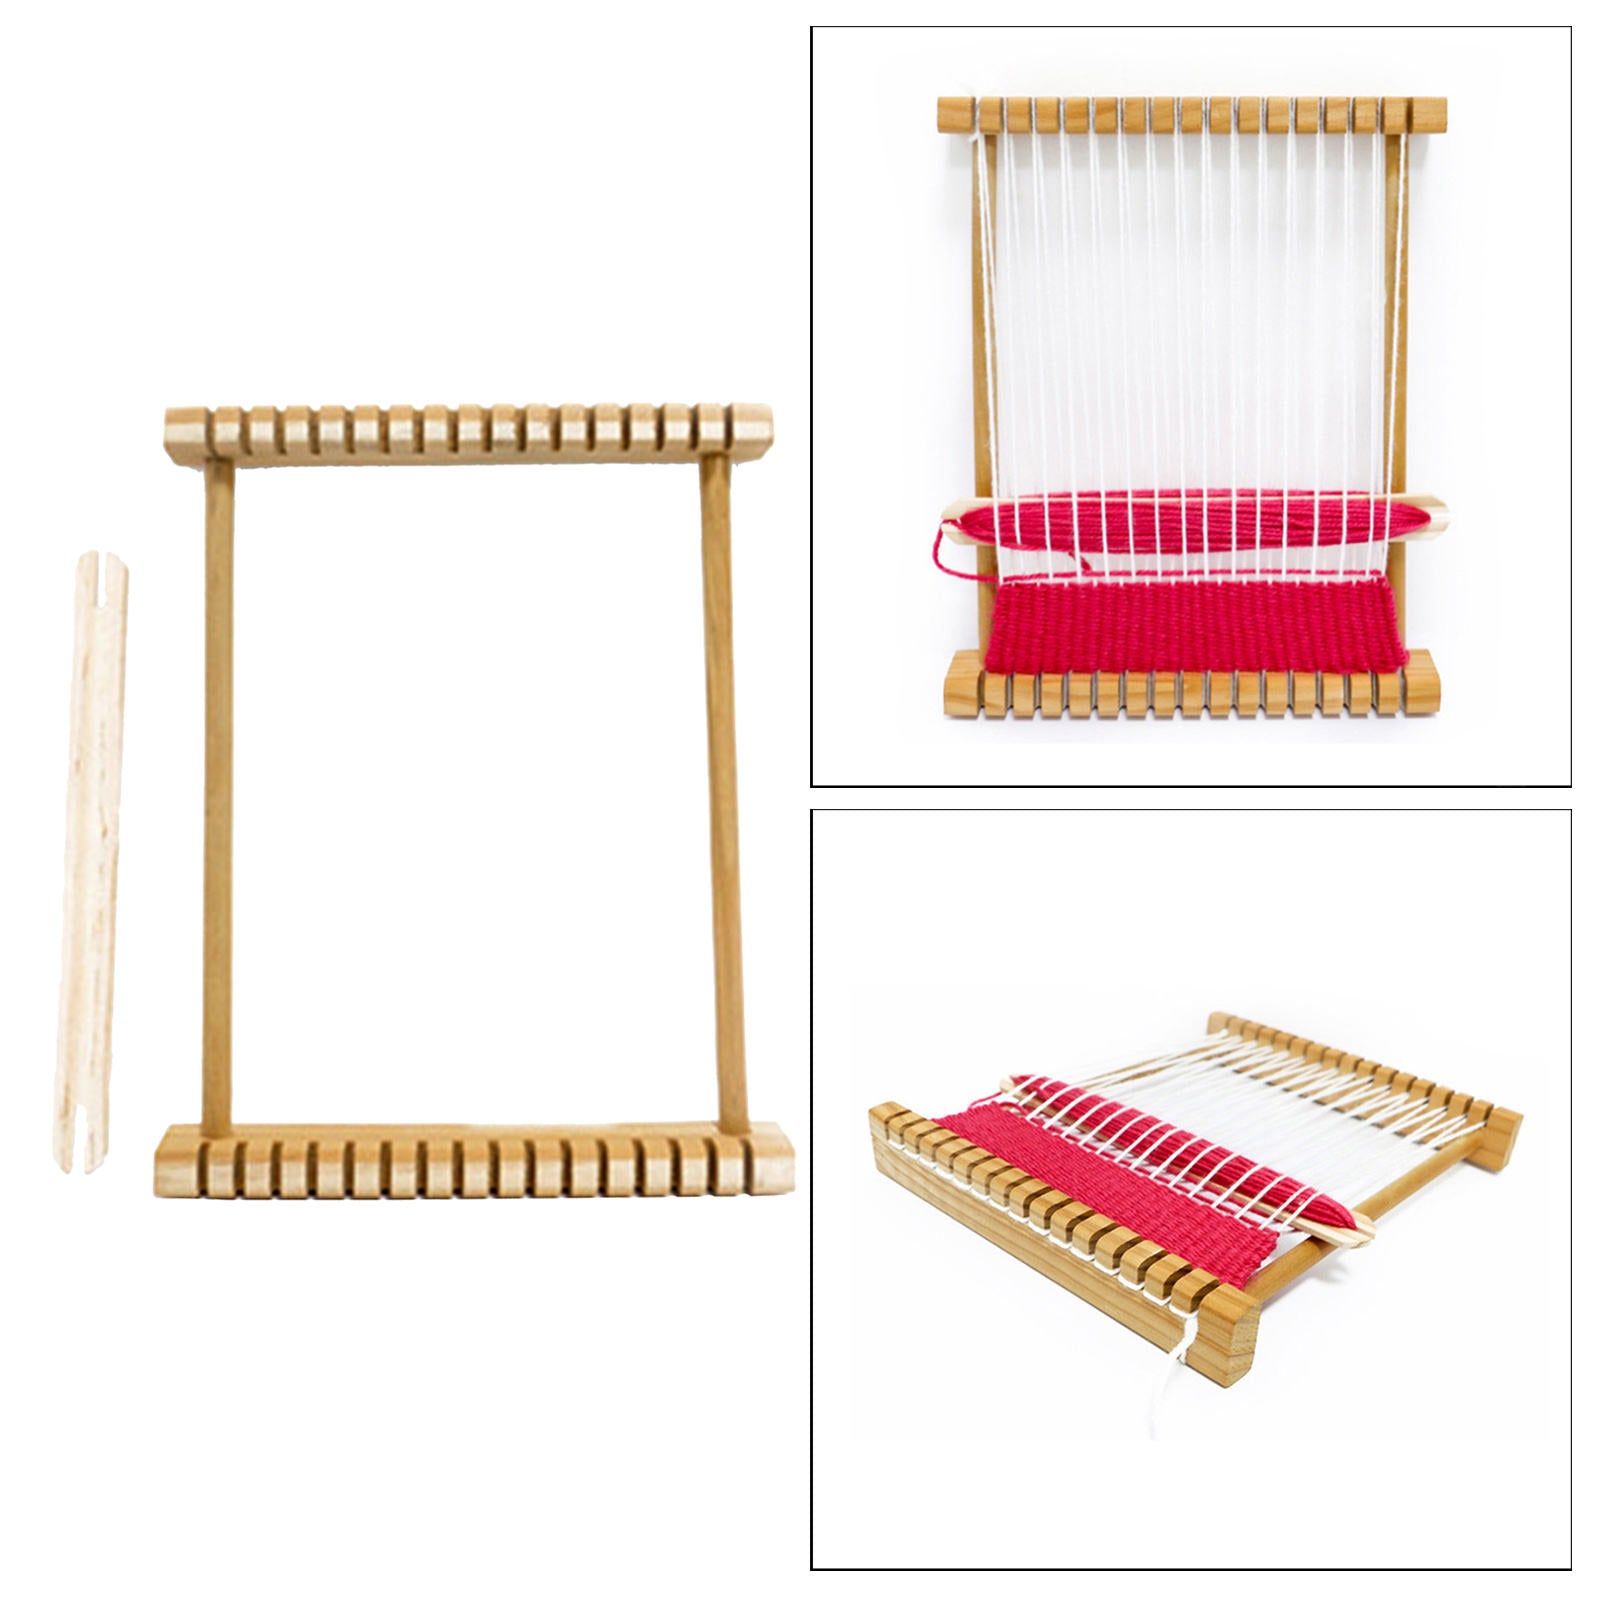 Wooden Weaving Loom Arts & Crafts Extra-Large Frame Multi-Craft for DIY Weaving